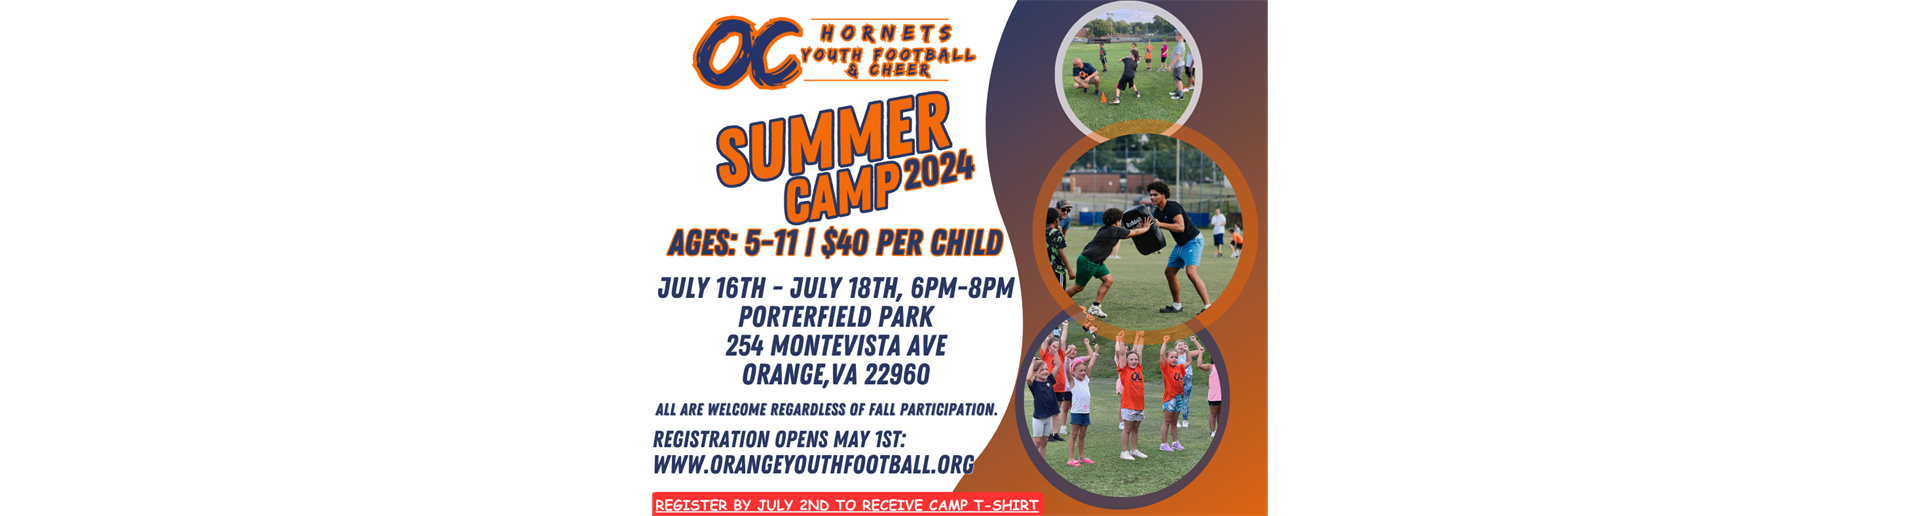 '24 Summer Football & Cheer Camp Registration opens May 1st